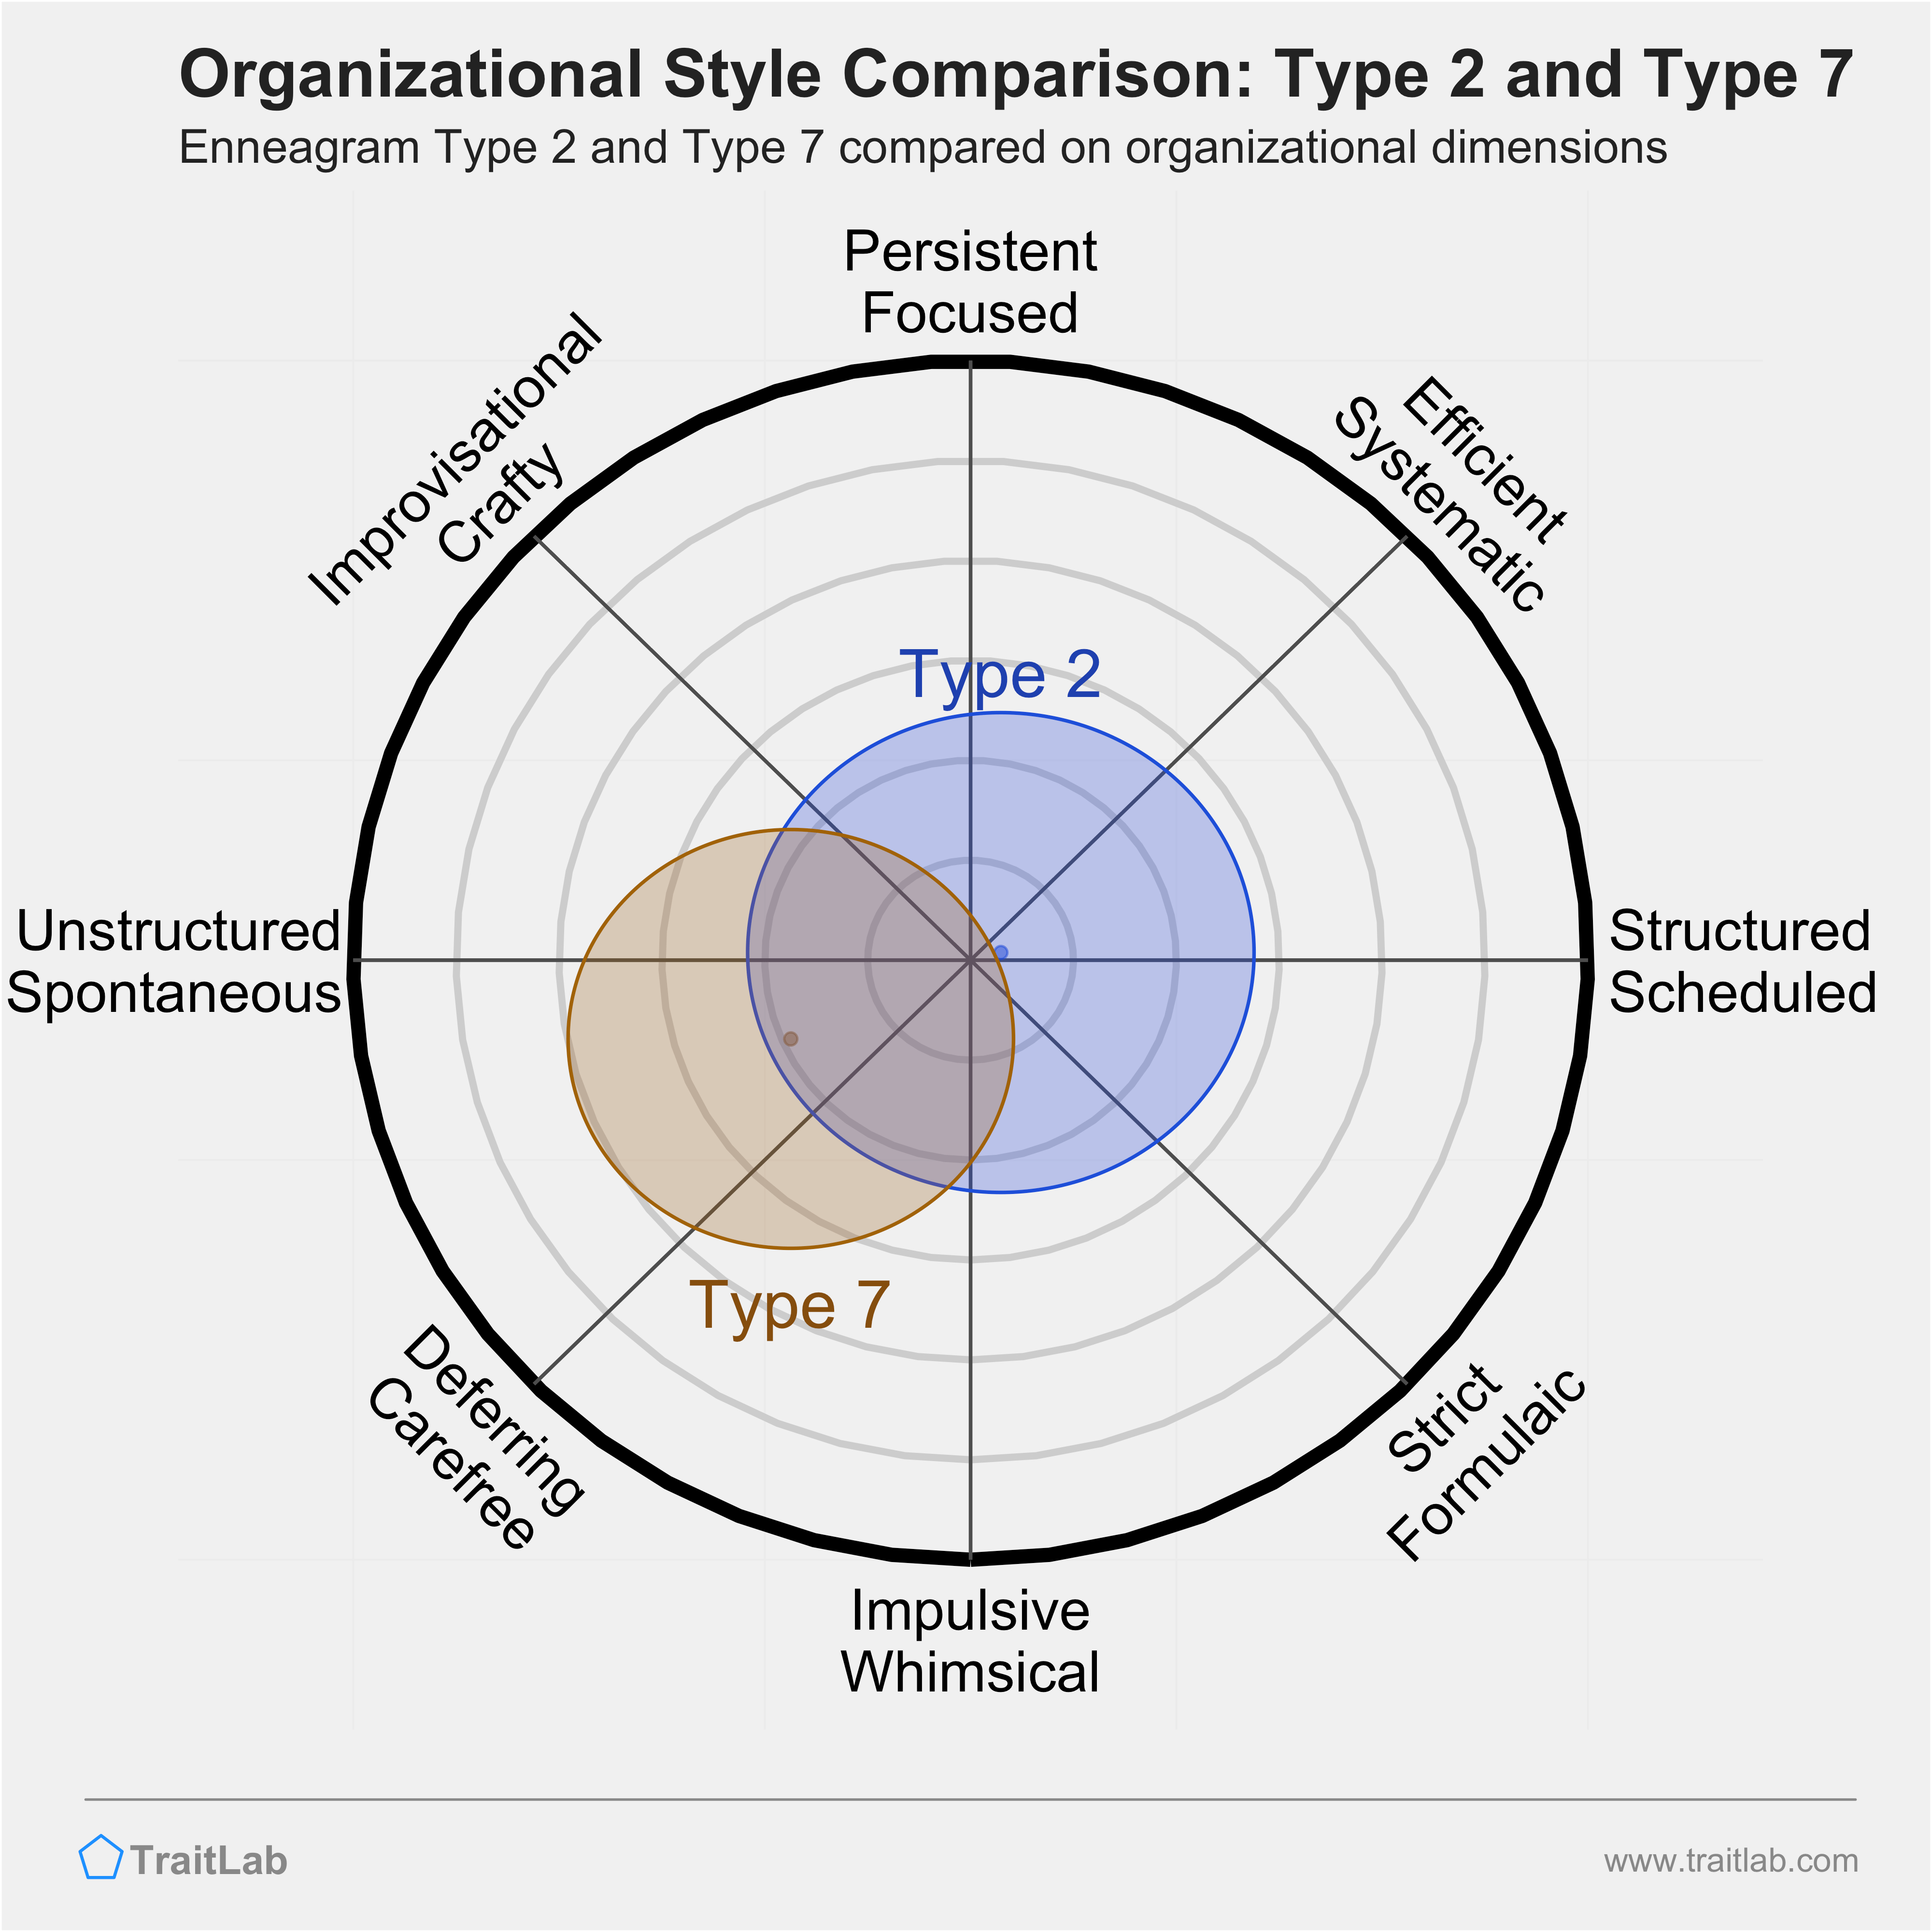 Type 2 and Type 7 comparison across organizational dimensions